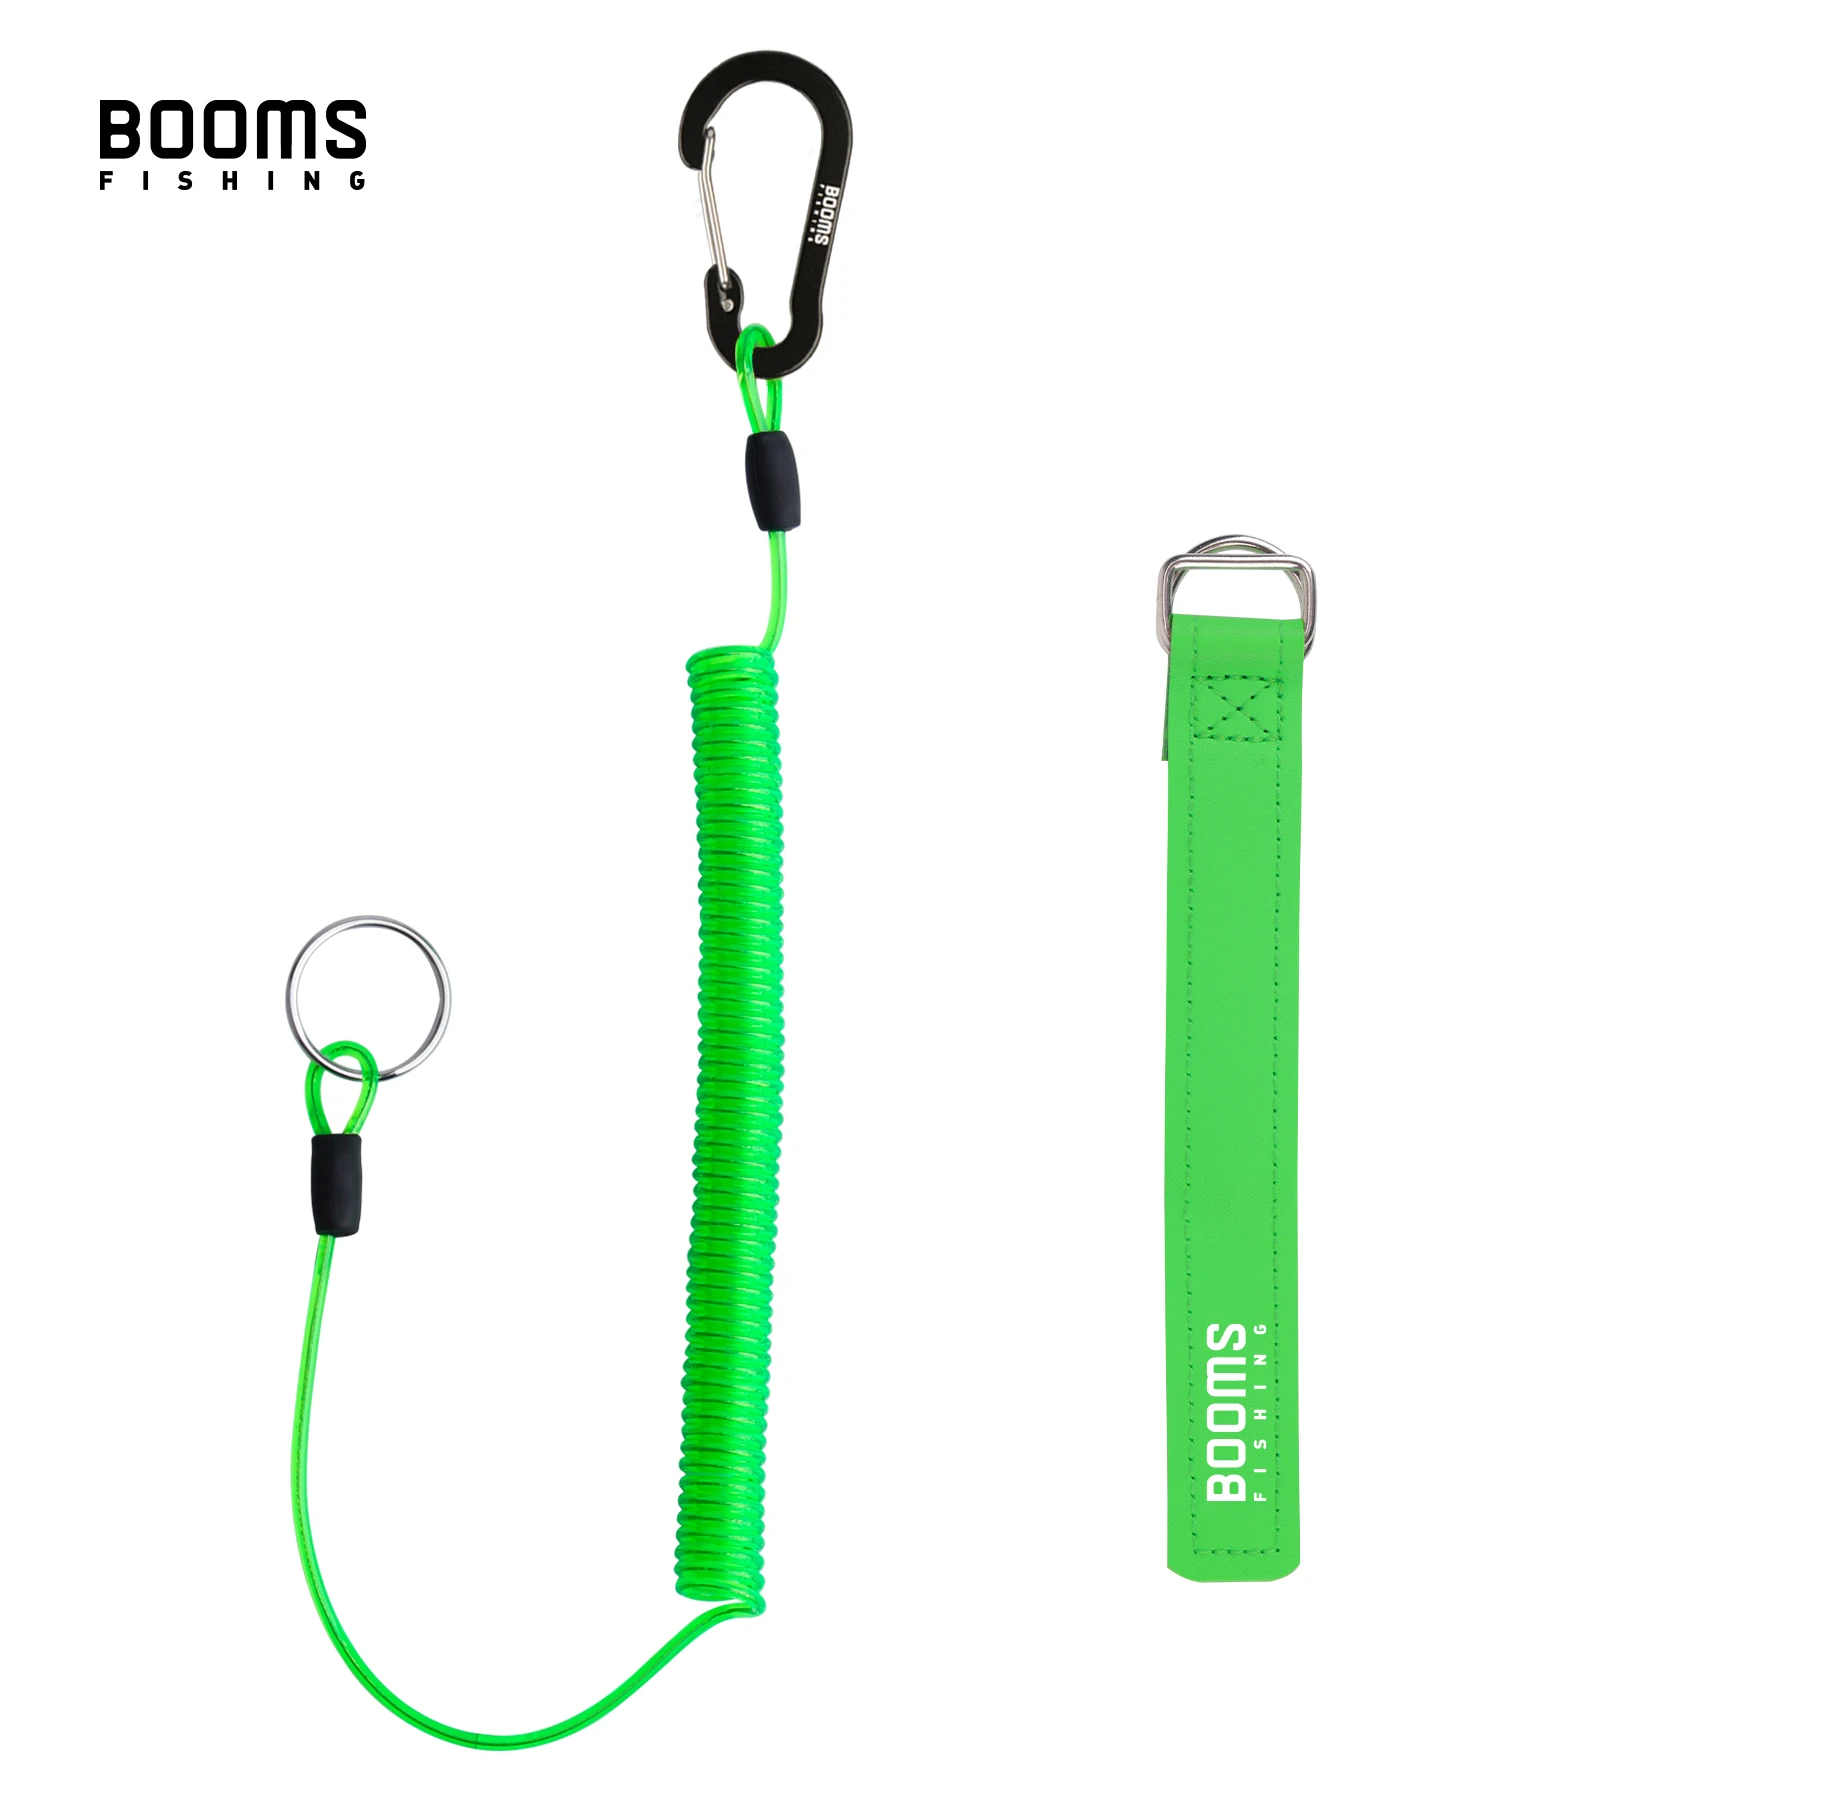 https://ae01.alicdn.com/kf/S85b1986a38e04906bb922250555009afz/Booms-Fishing-T01-2M-Coiled-Lanyards-Carabiner-Clip-with-Rod-Straps-for-Fishing-Rod-and-Landing.jpg